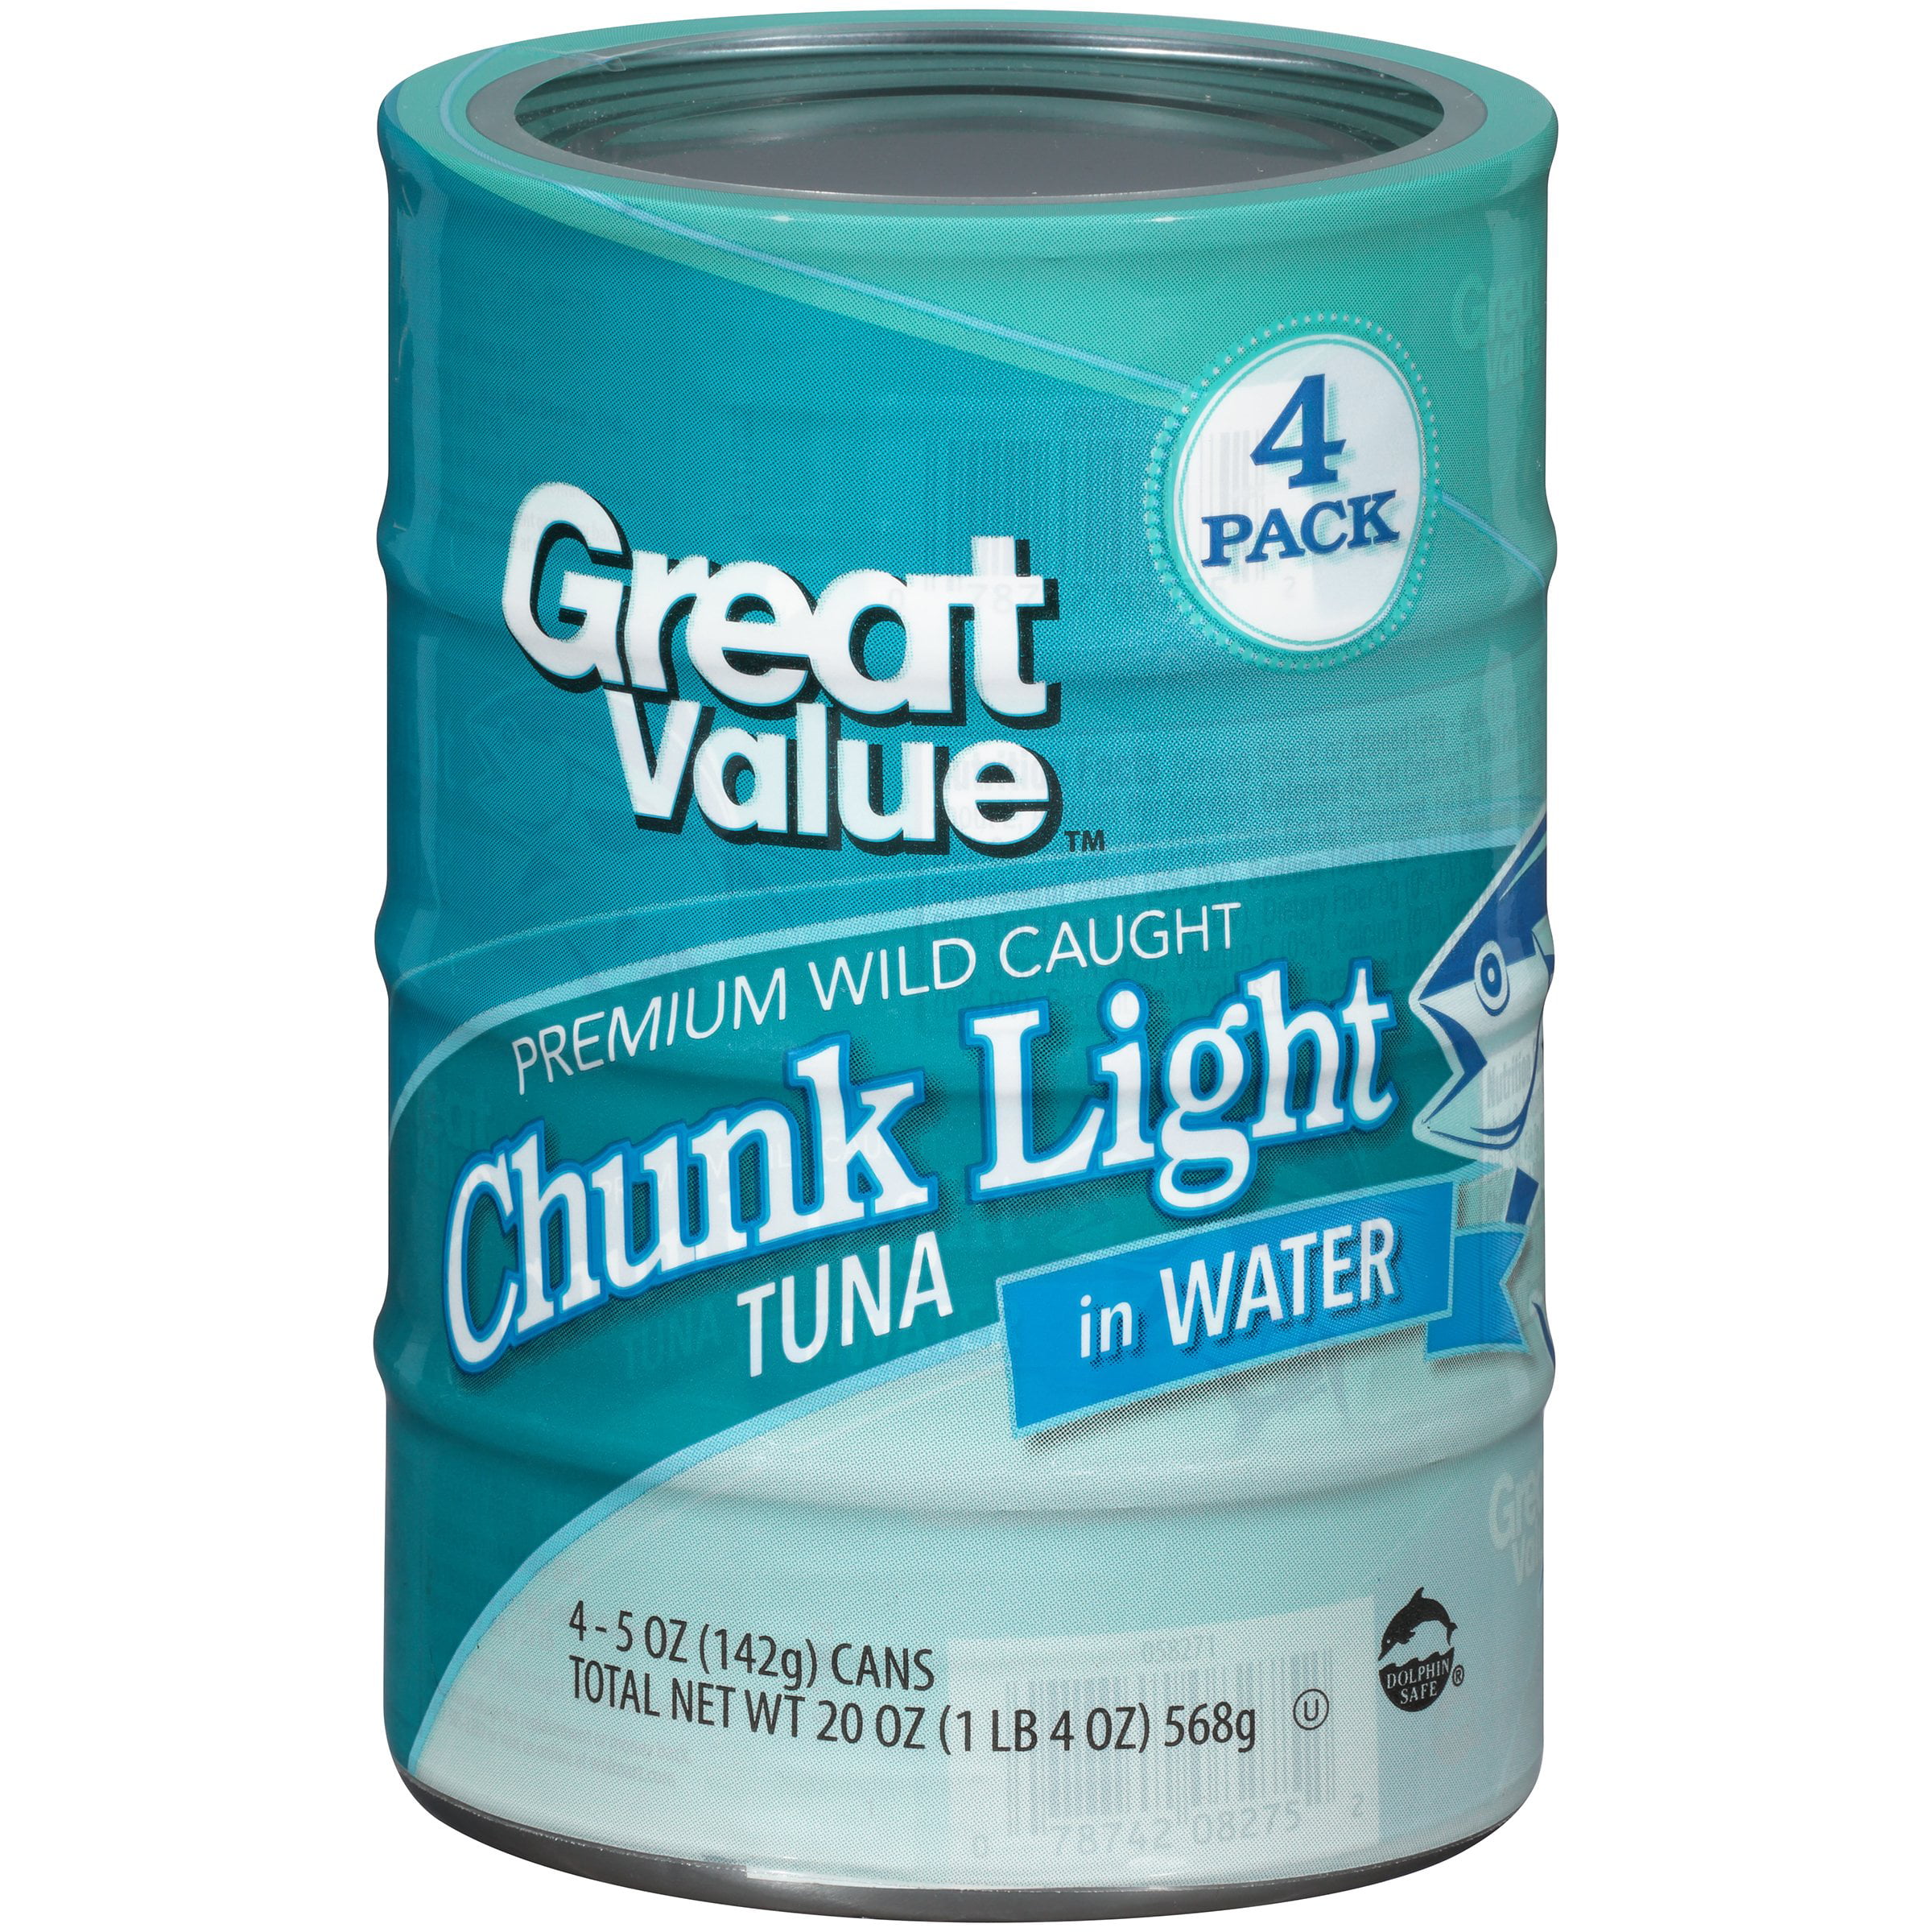 (3 pack) (12 Cans) Great Value Chunk Light Tuna in Water, 5 oz